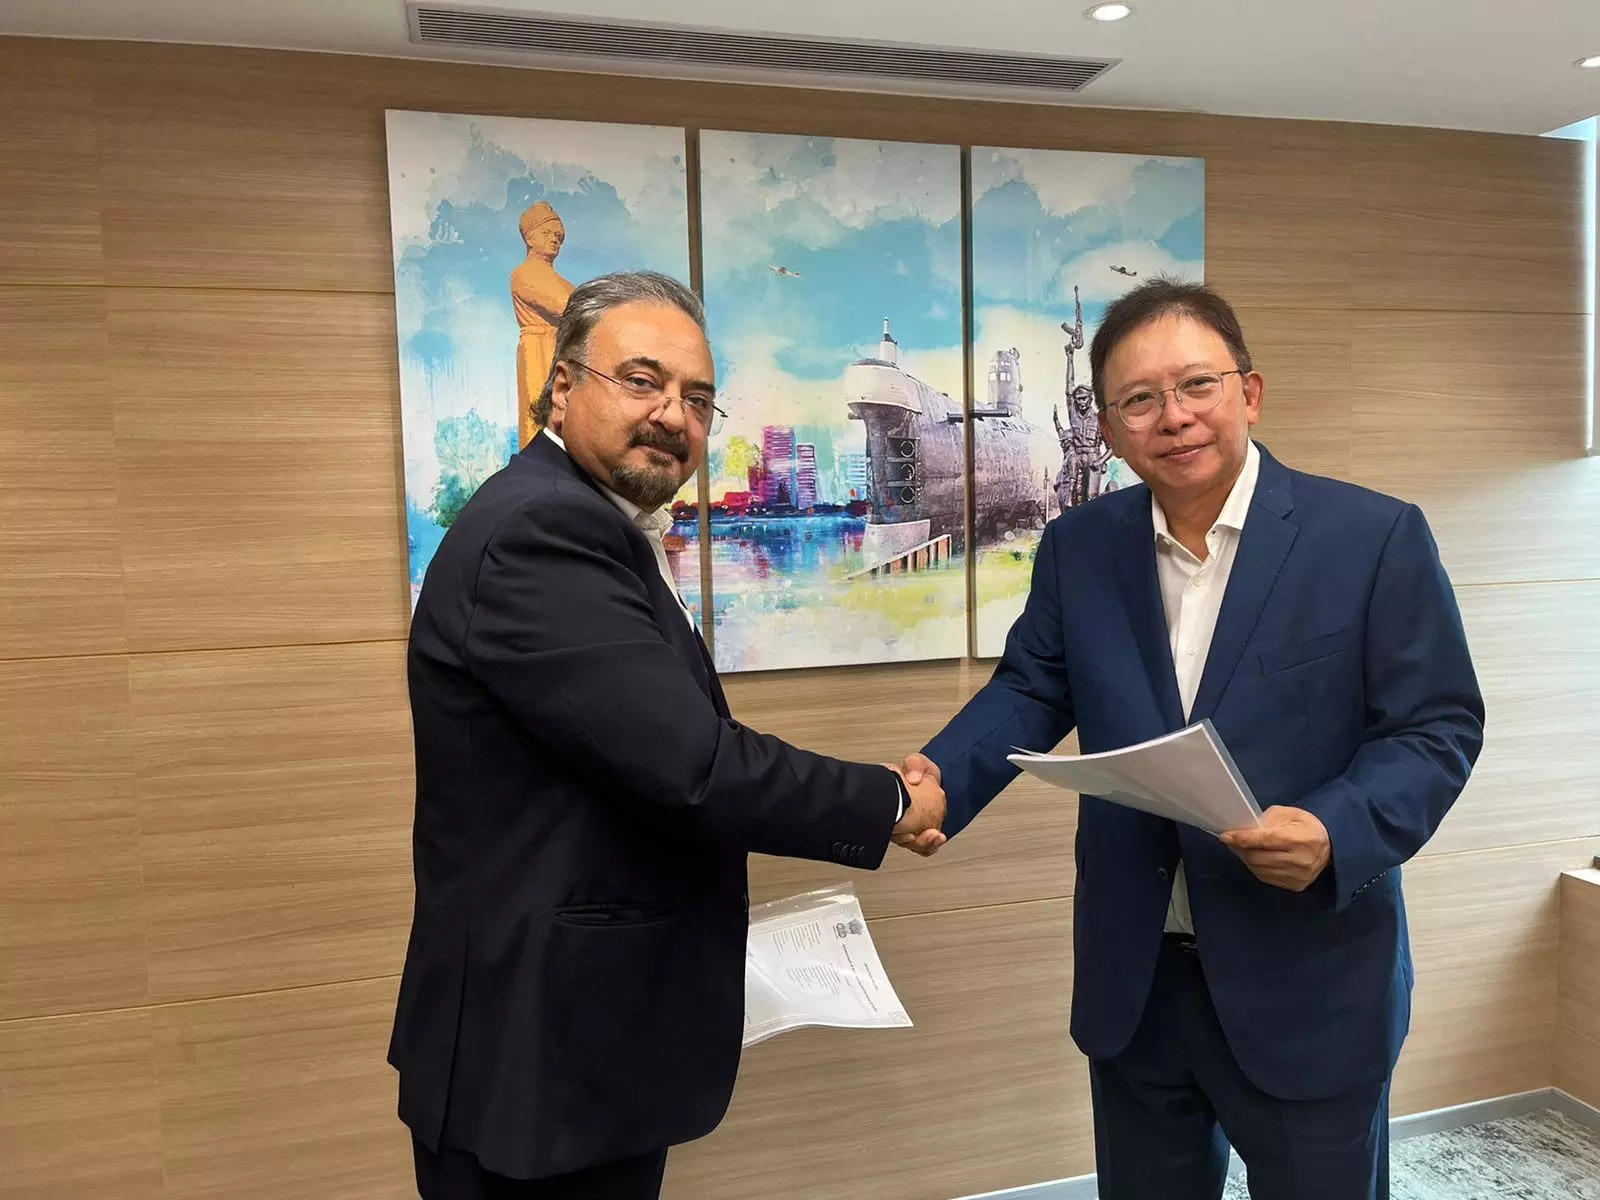  The two-wheeler manufacturer has partnered with Terrafirma Motors Corporation (TMC) to supply motorcycles to the Southeast Asian market.